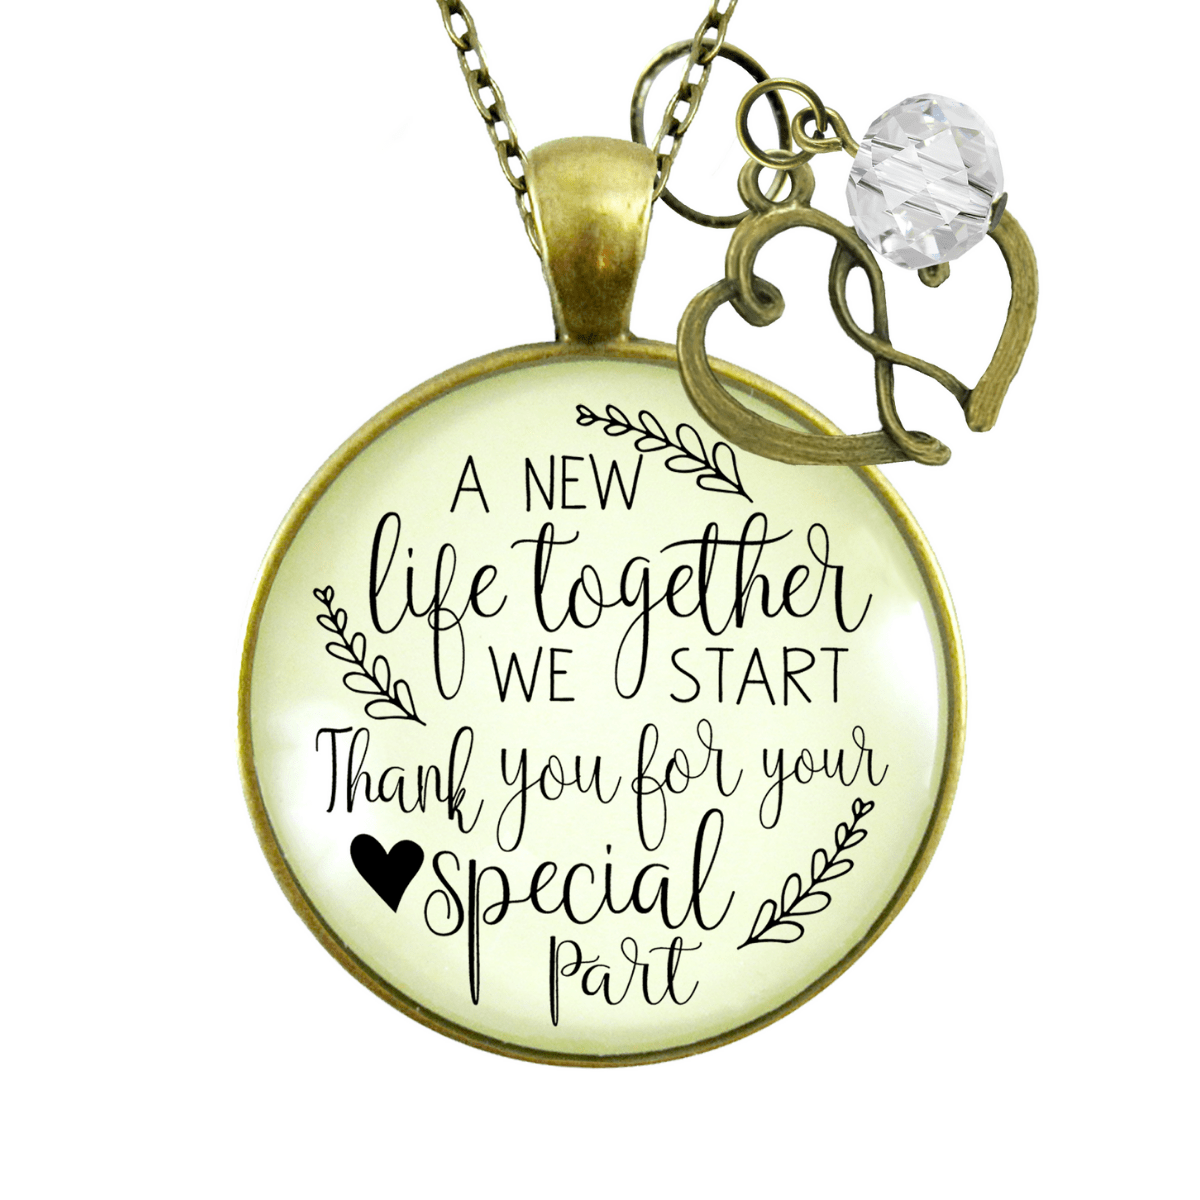 Gutsy Goodness Wedding Officiant Gift Necklace A New Life Heart Charm Thank You - Gutsy Goodness Handmade Jewelry;Wedding Officiant Gift Necklace A New Life Heart Charm Thank You - Gutsy Goodness Handmade Jewelry Gifts